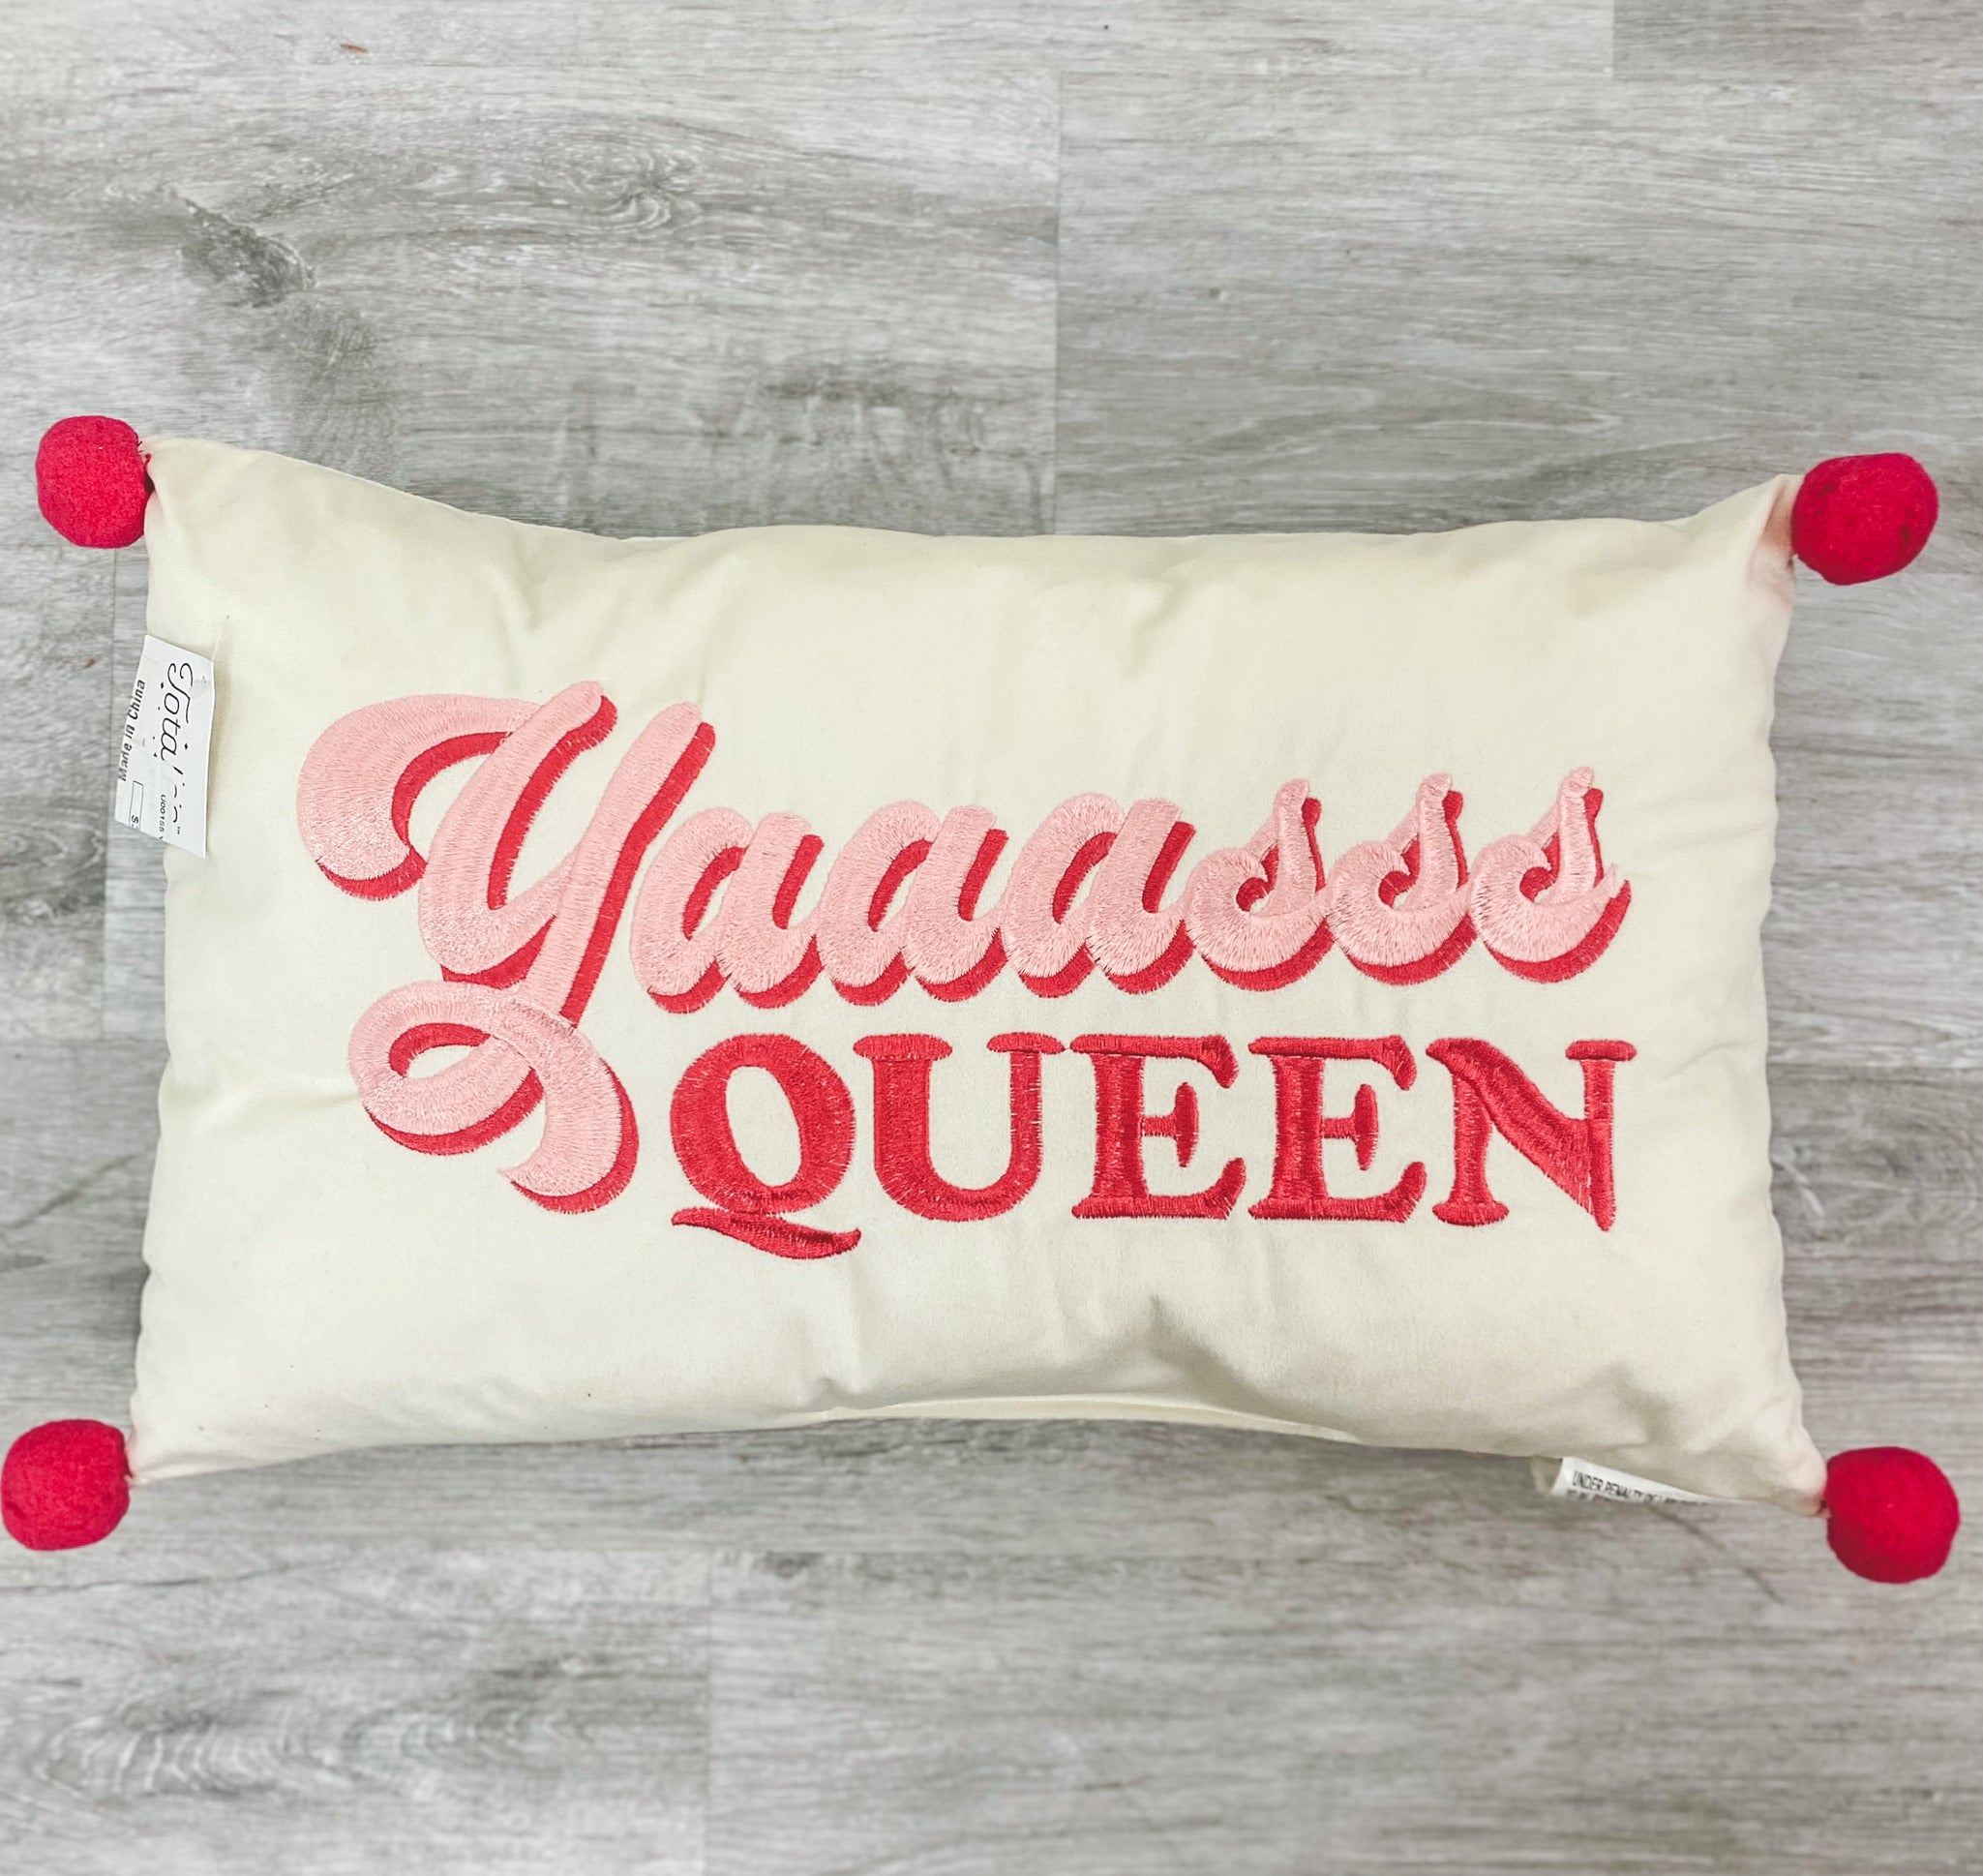 Yas Queen lumbar pillow - Vintage Band T-Shirts and Sweatshirts at Lush Fashion Lounge Boutique in Oklahoma City